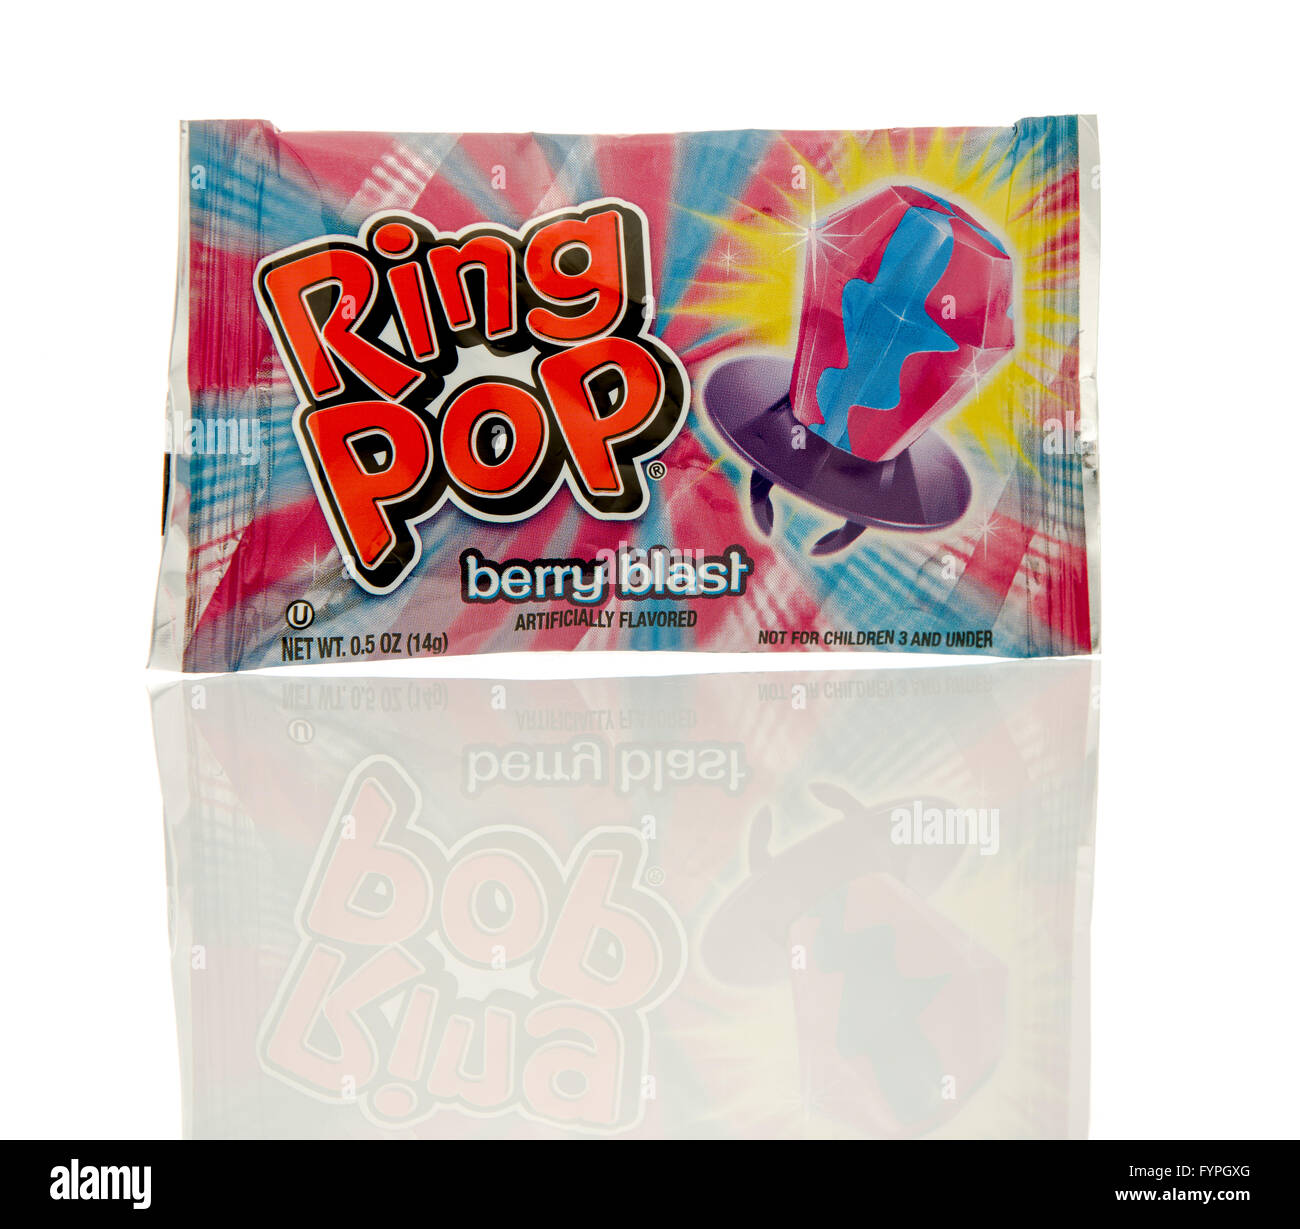 Topps Ring pop Twisted Fruit pop Candy 24 Count - 0.5 oz | eBay